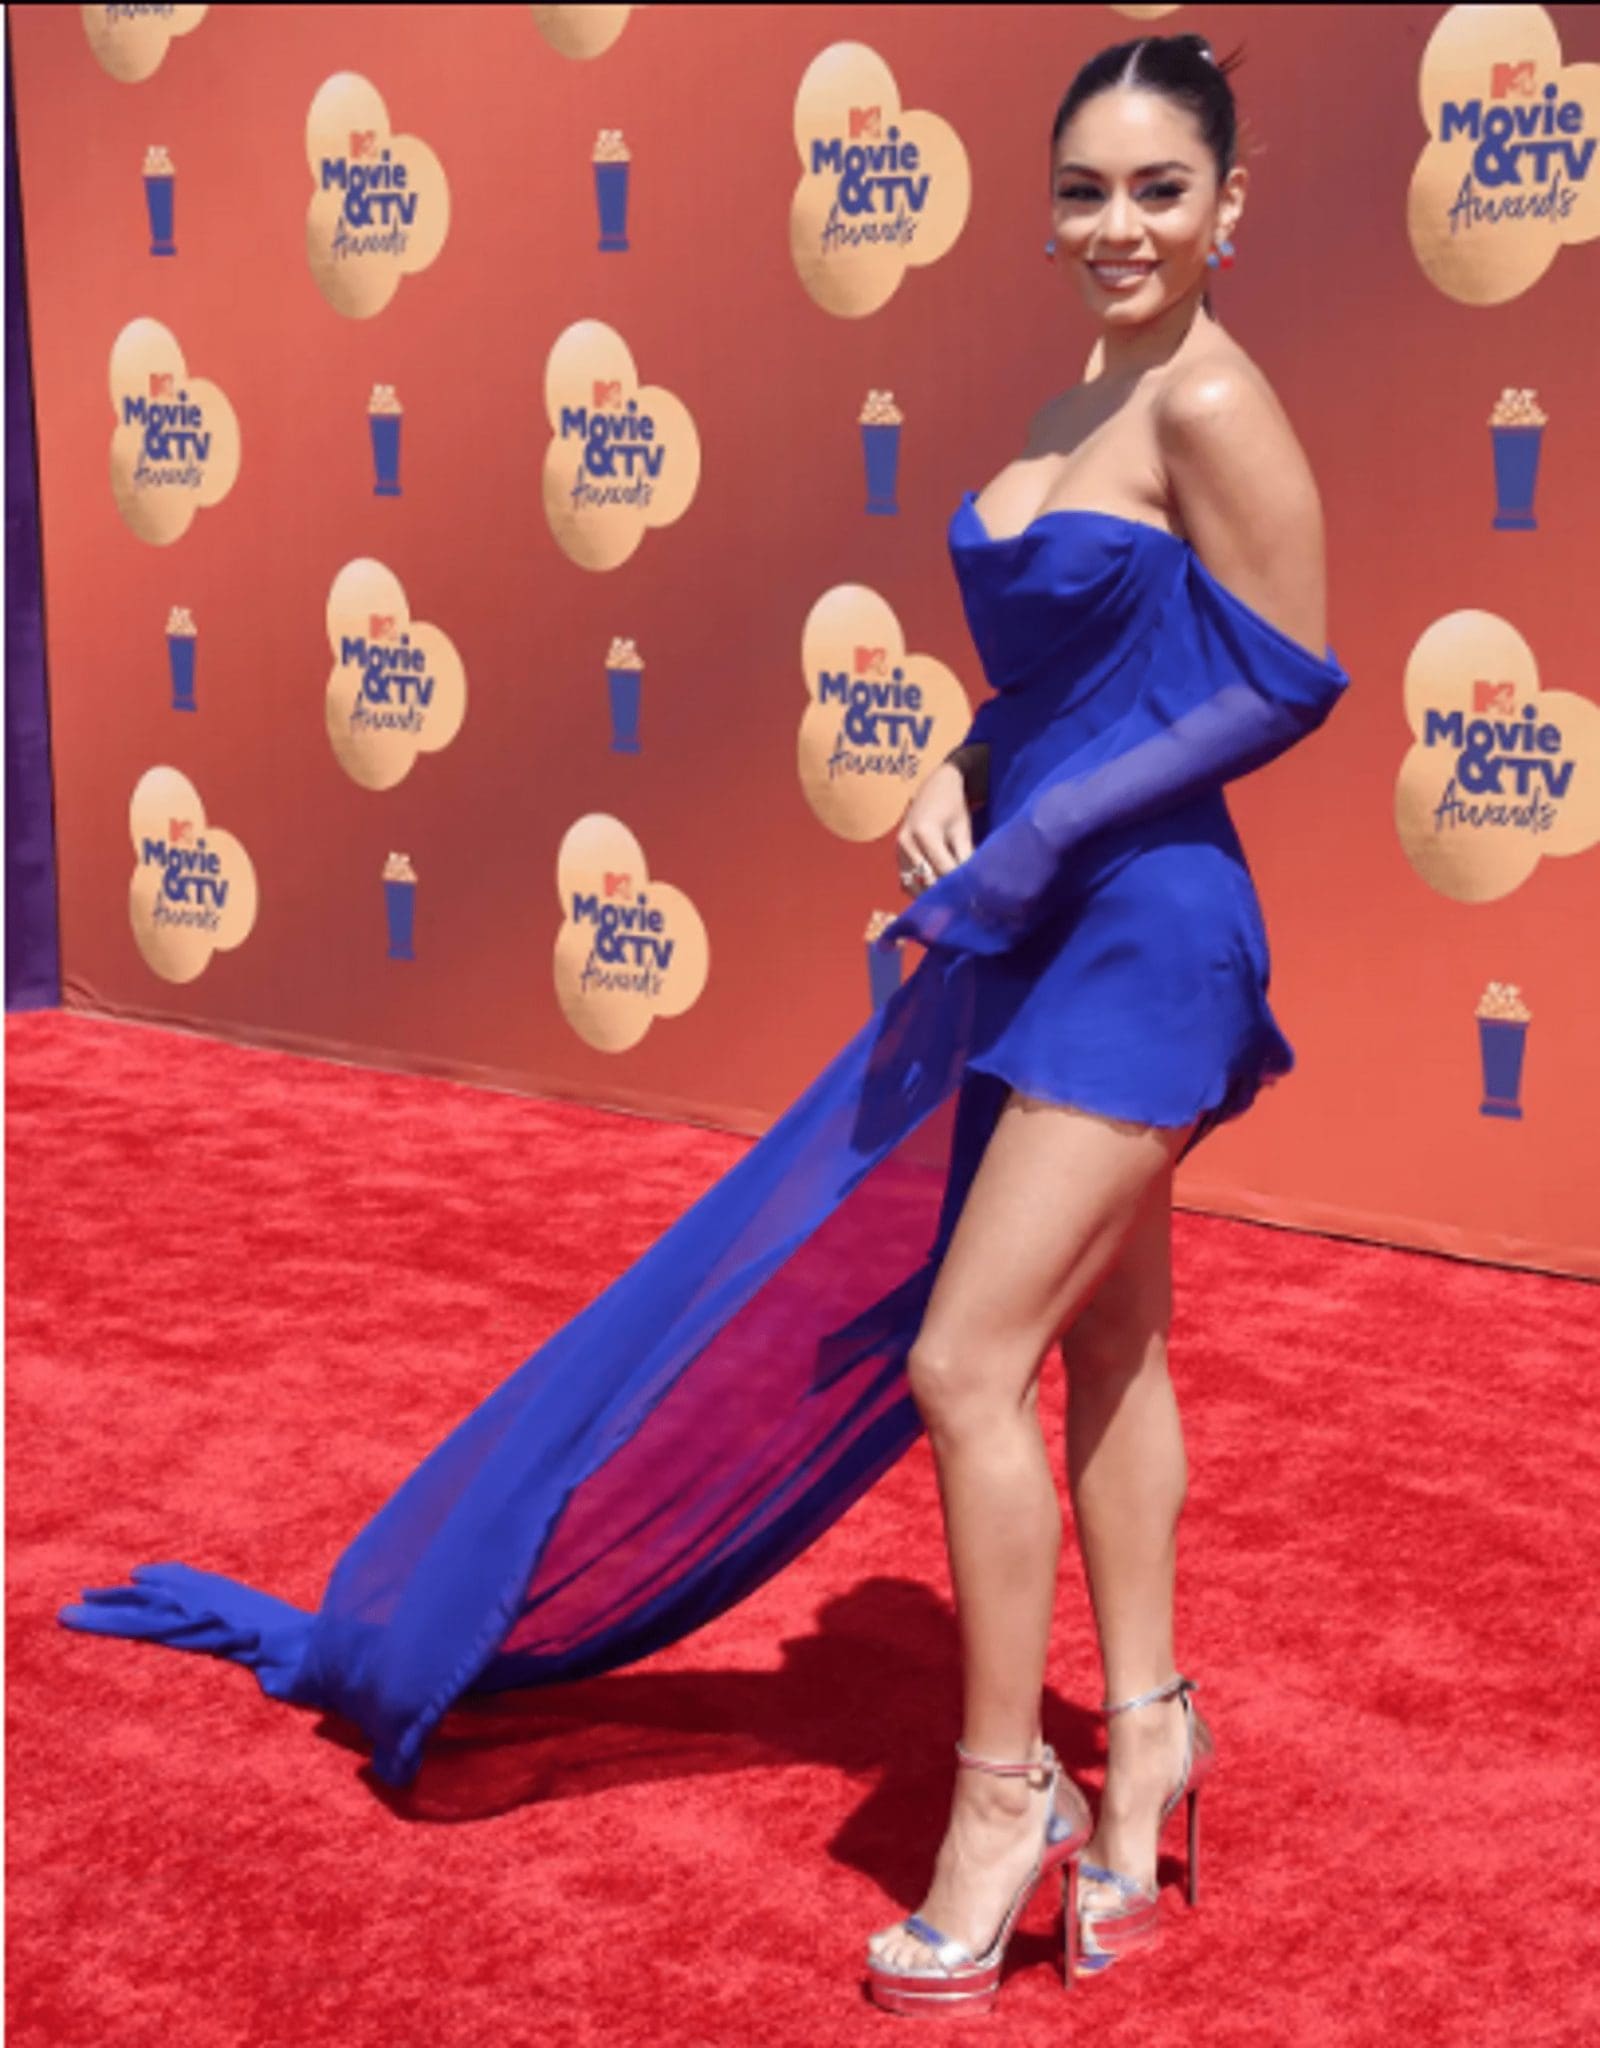 Vanessa Hudgens in an electric blue dress with a flowing train and other guests of the MTV Movie & TV Awards 2022